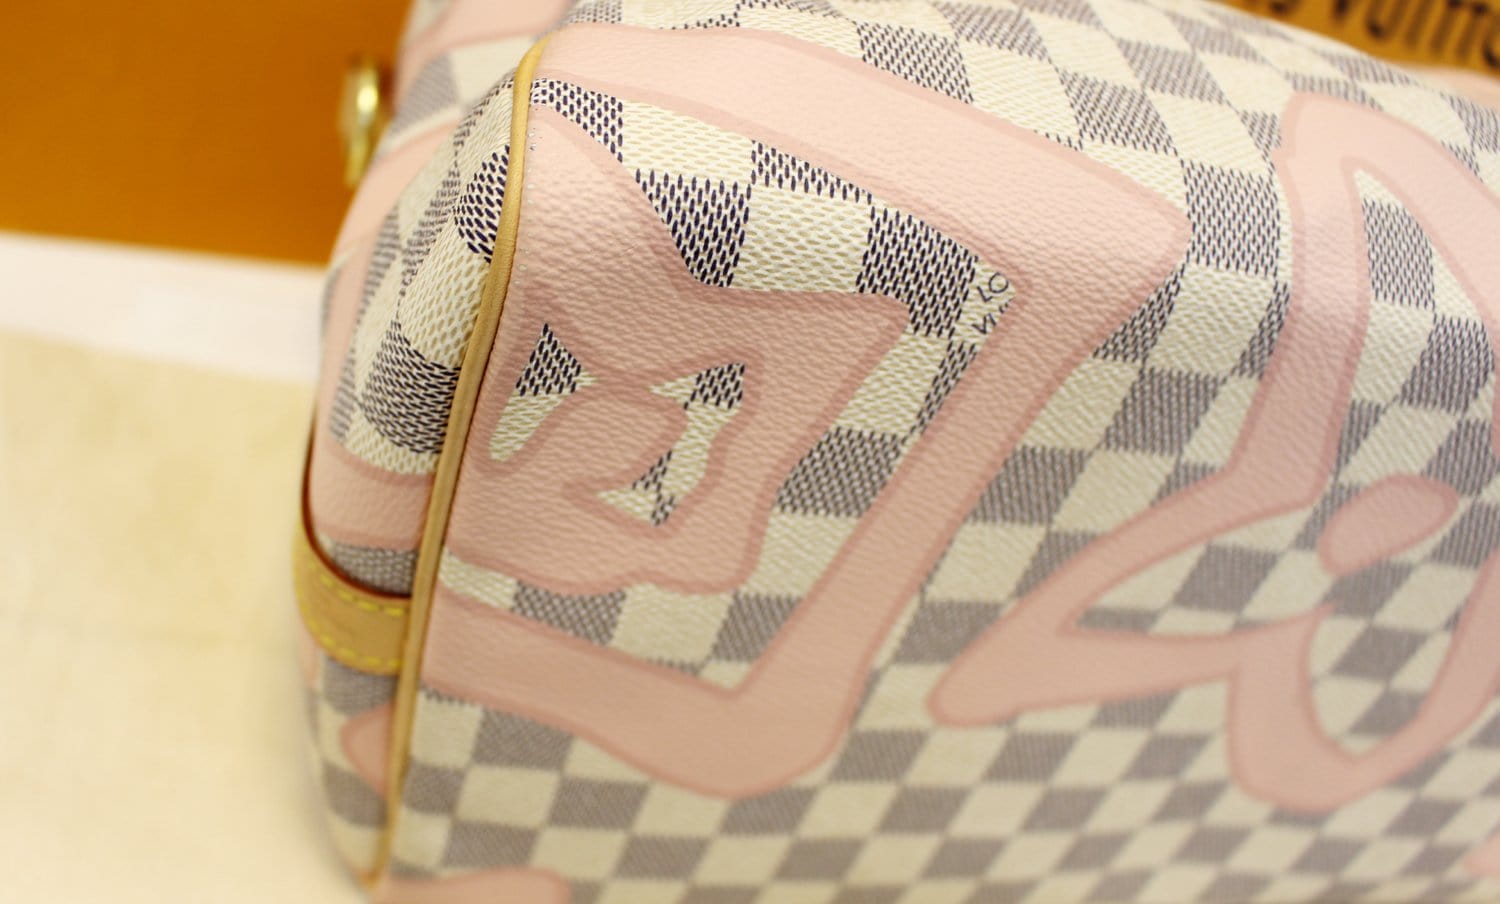 Louis Vuitton Damier Azur Tahitiennes Collection - Spotted Fashion